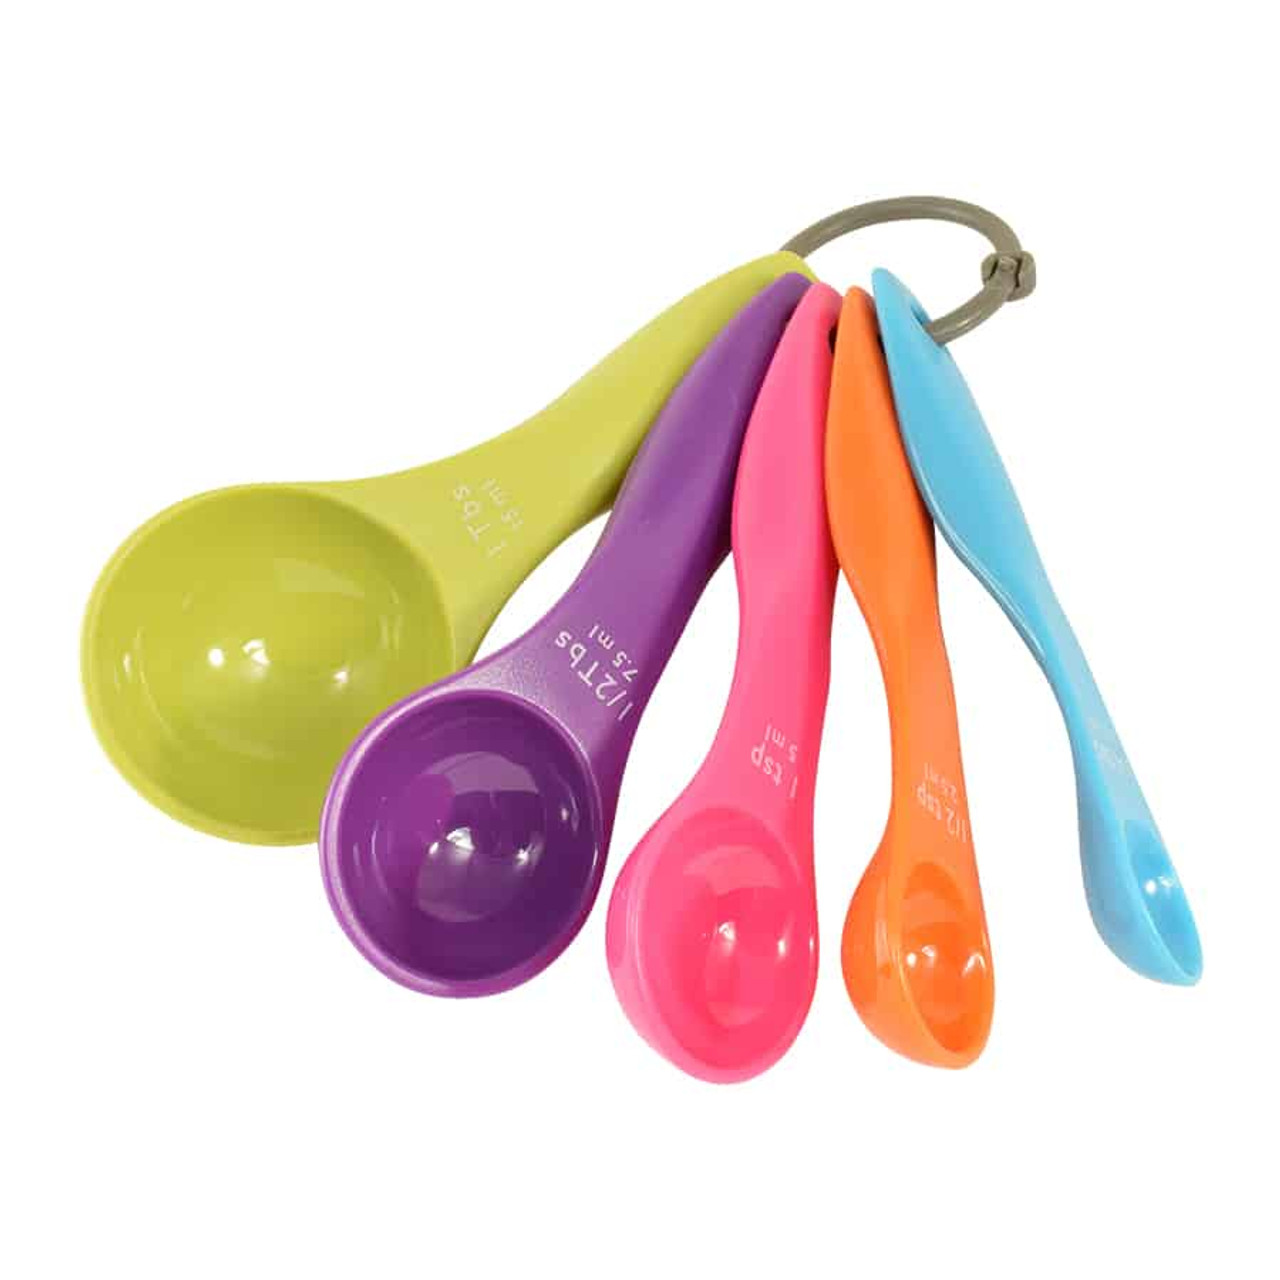 Fred & Friends Nesting Measuring Cups